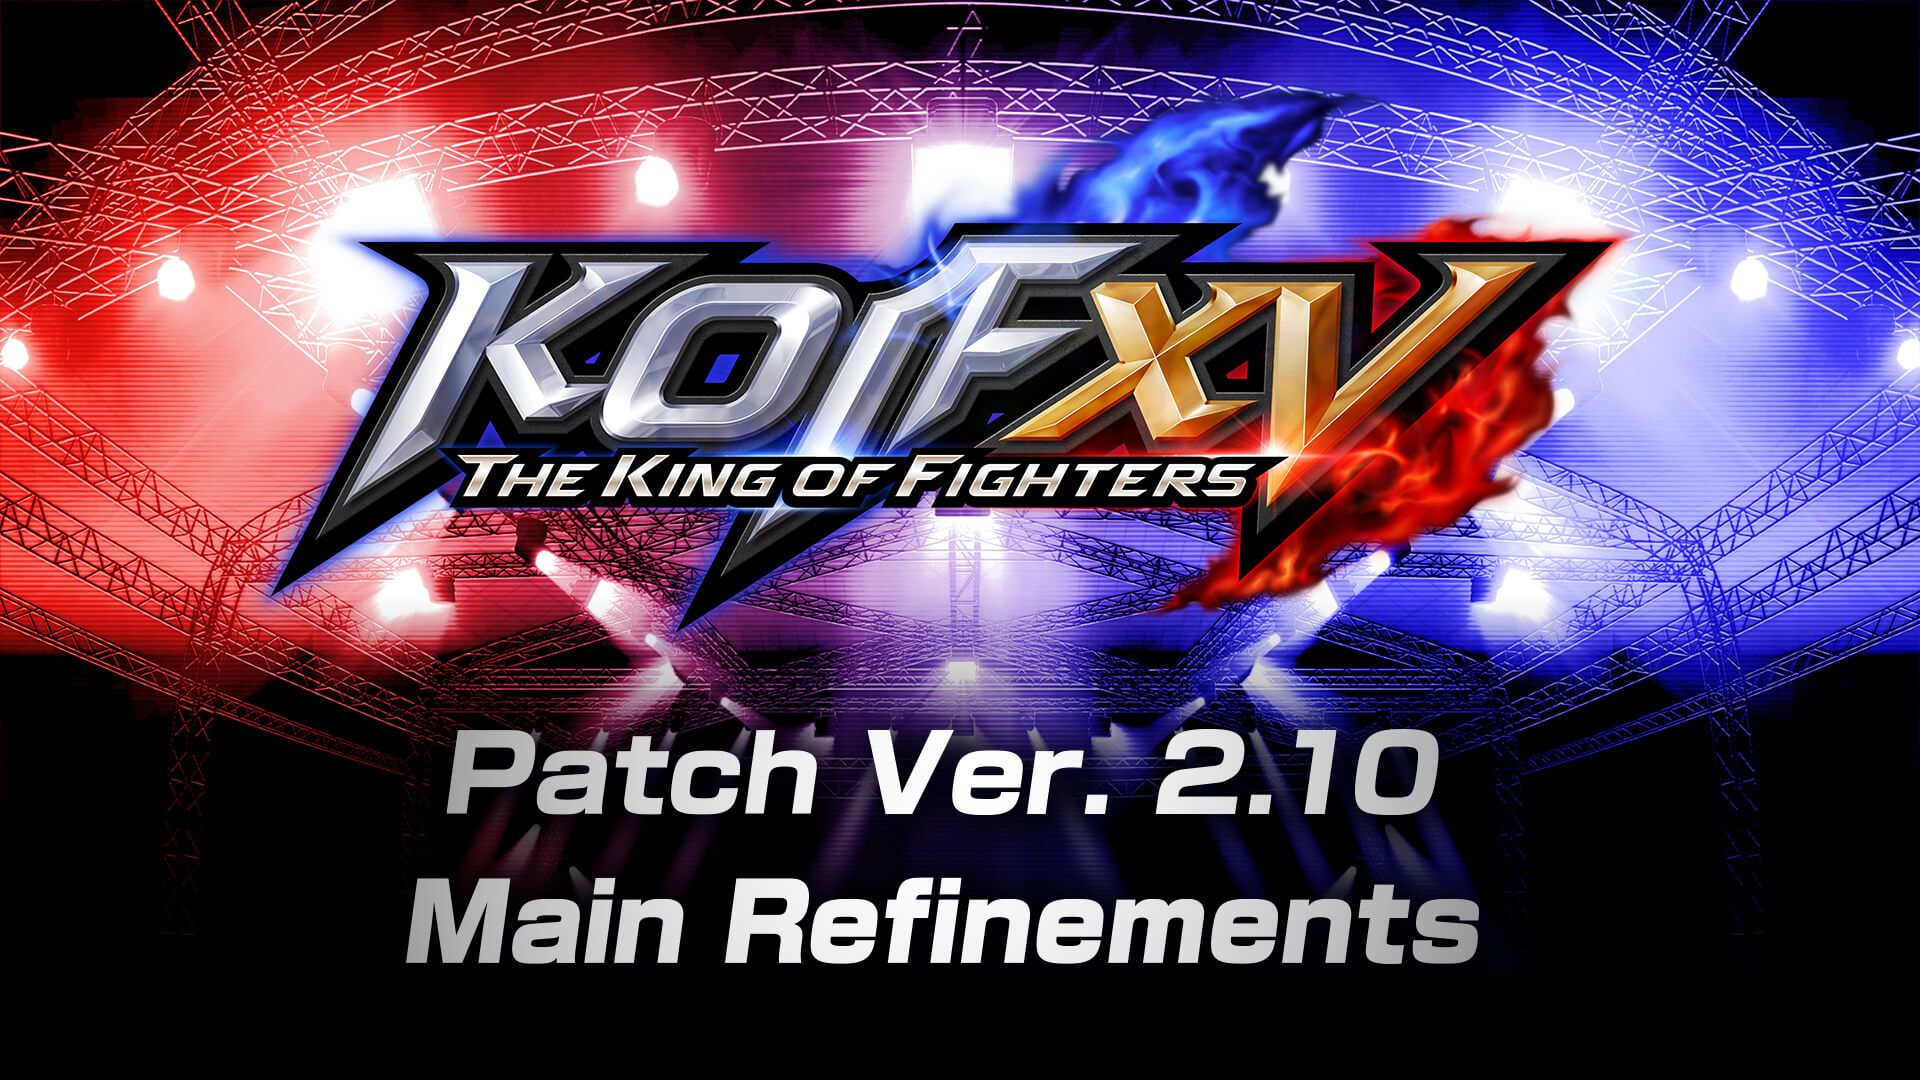 King of Fighters Ver. 2.10 Patch Notes